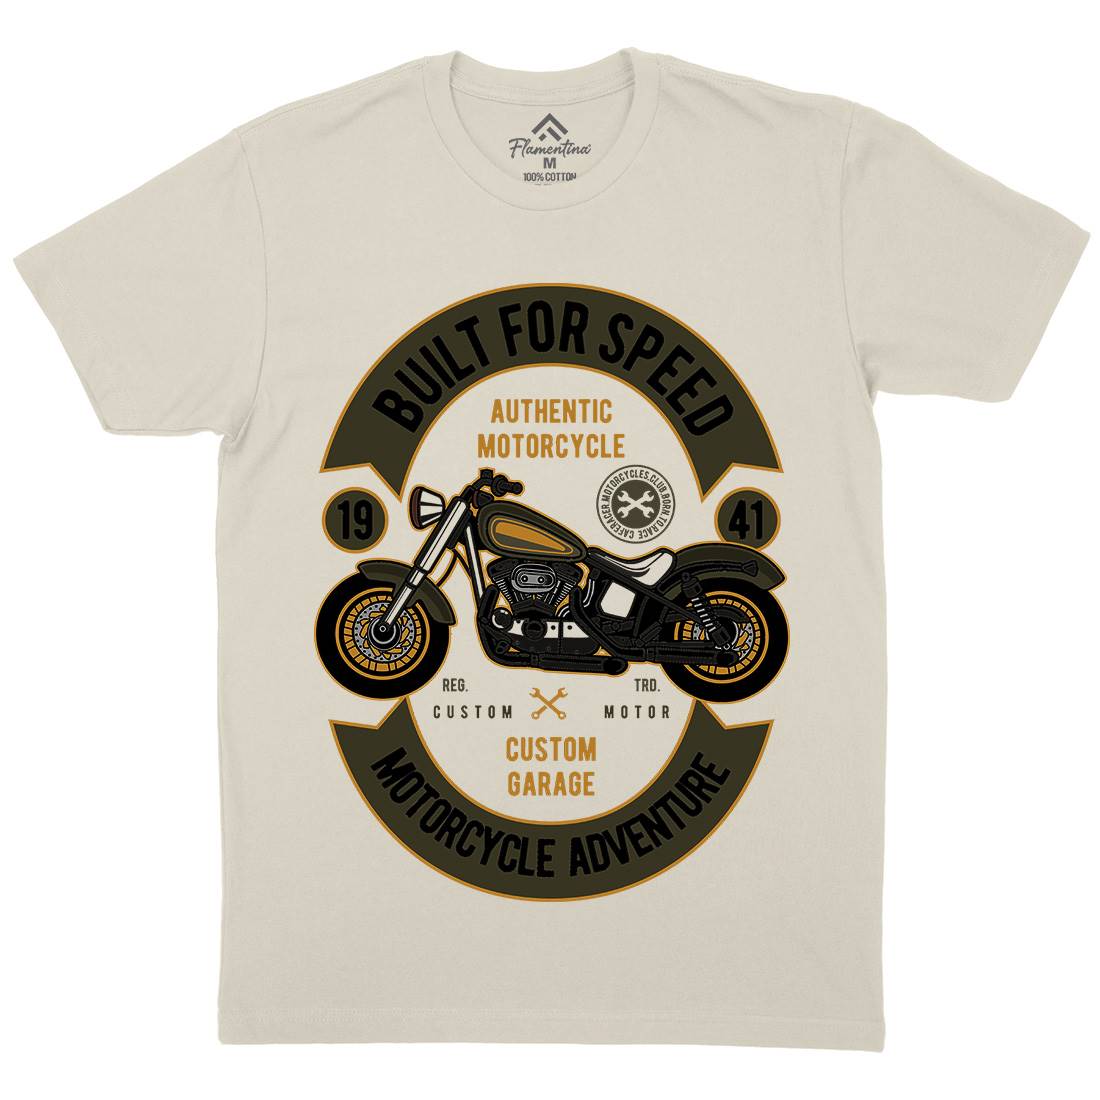 Built For Speed Mens Organic Crew Neck T-Shirt Motorcycles D512